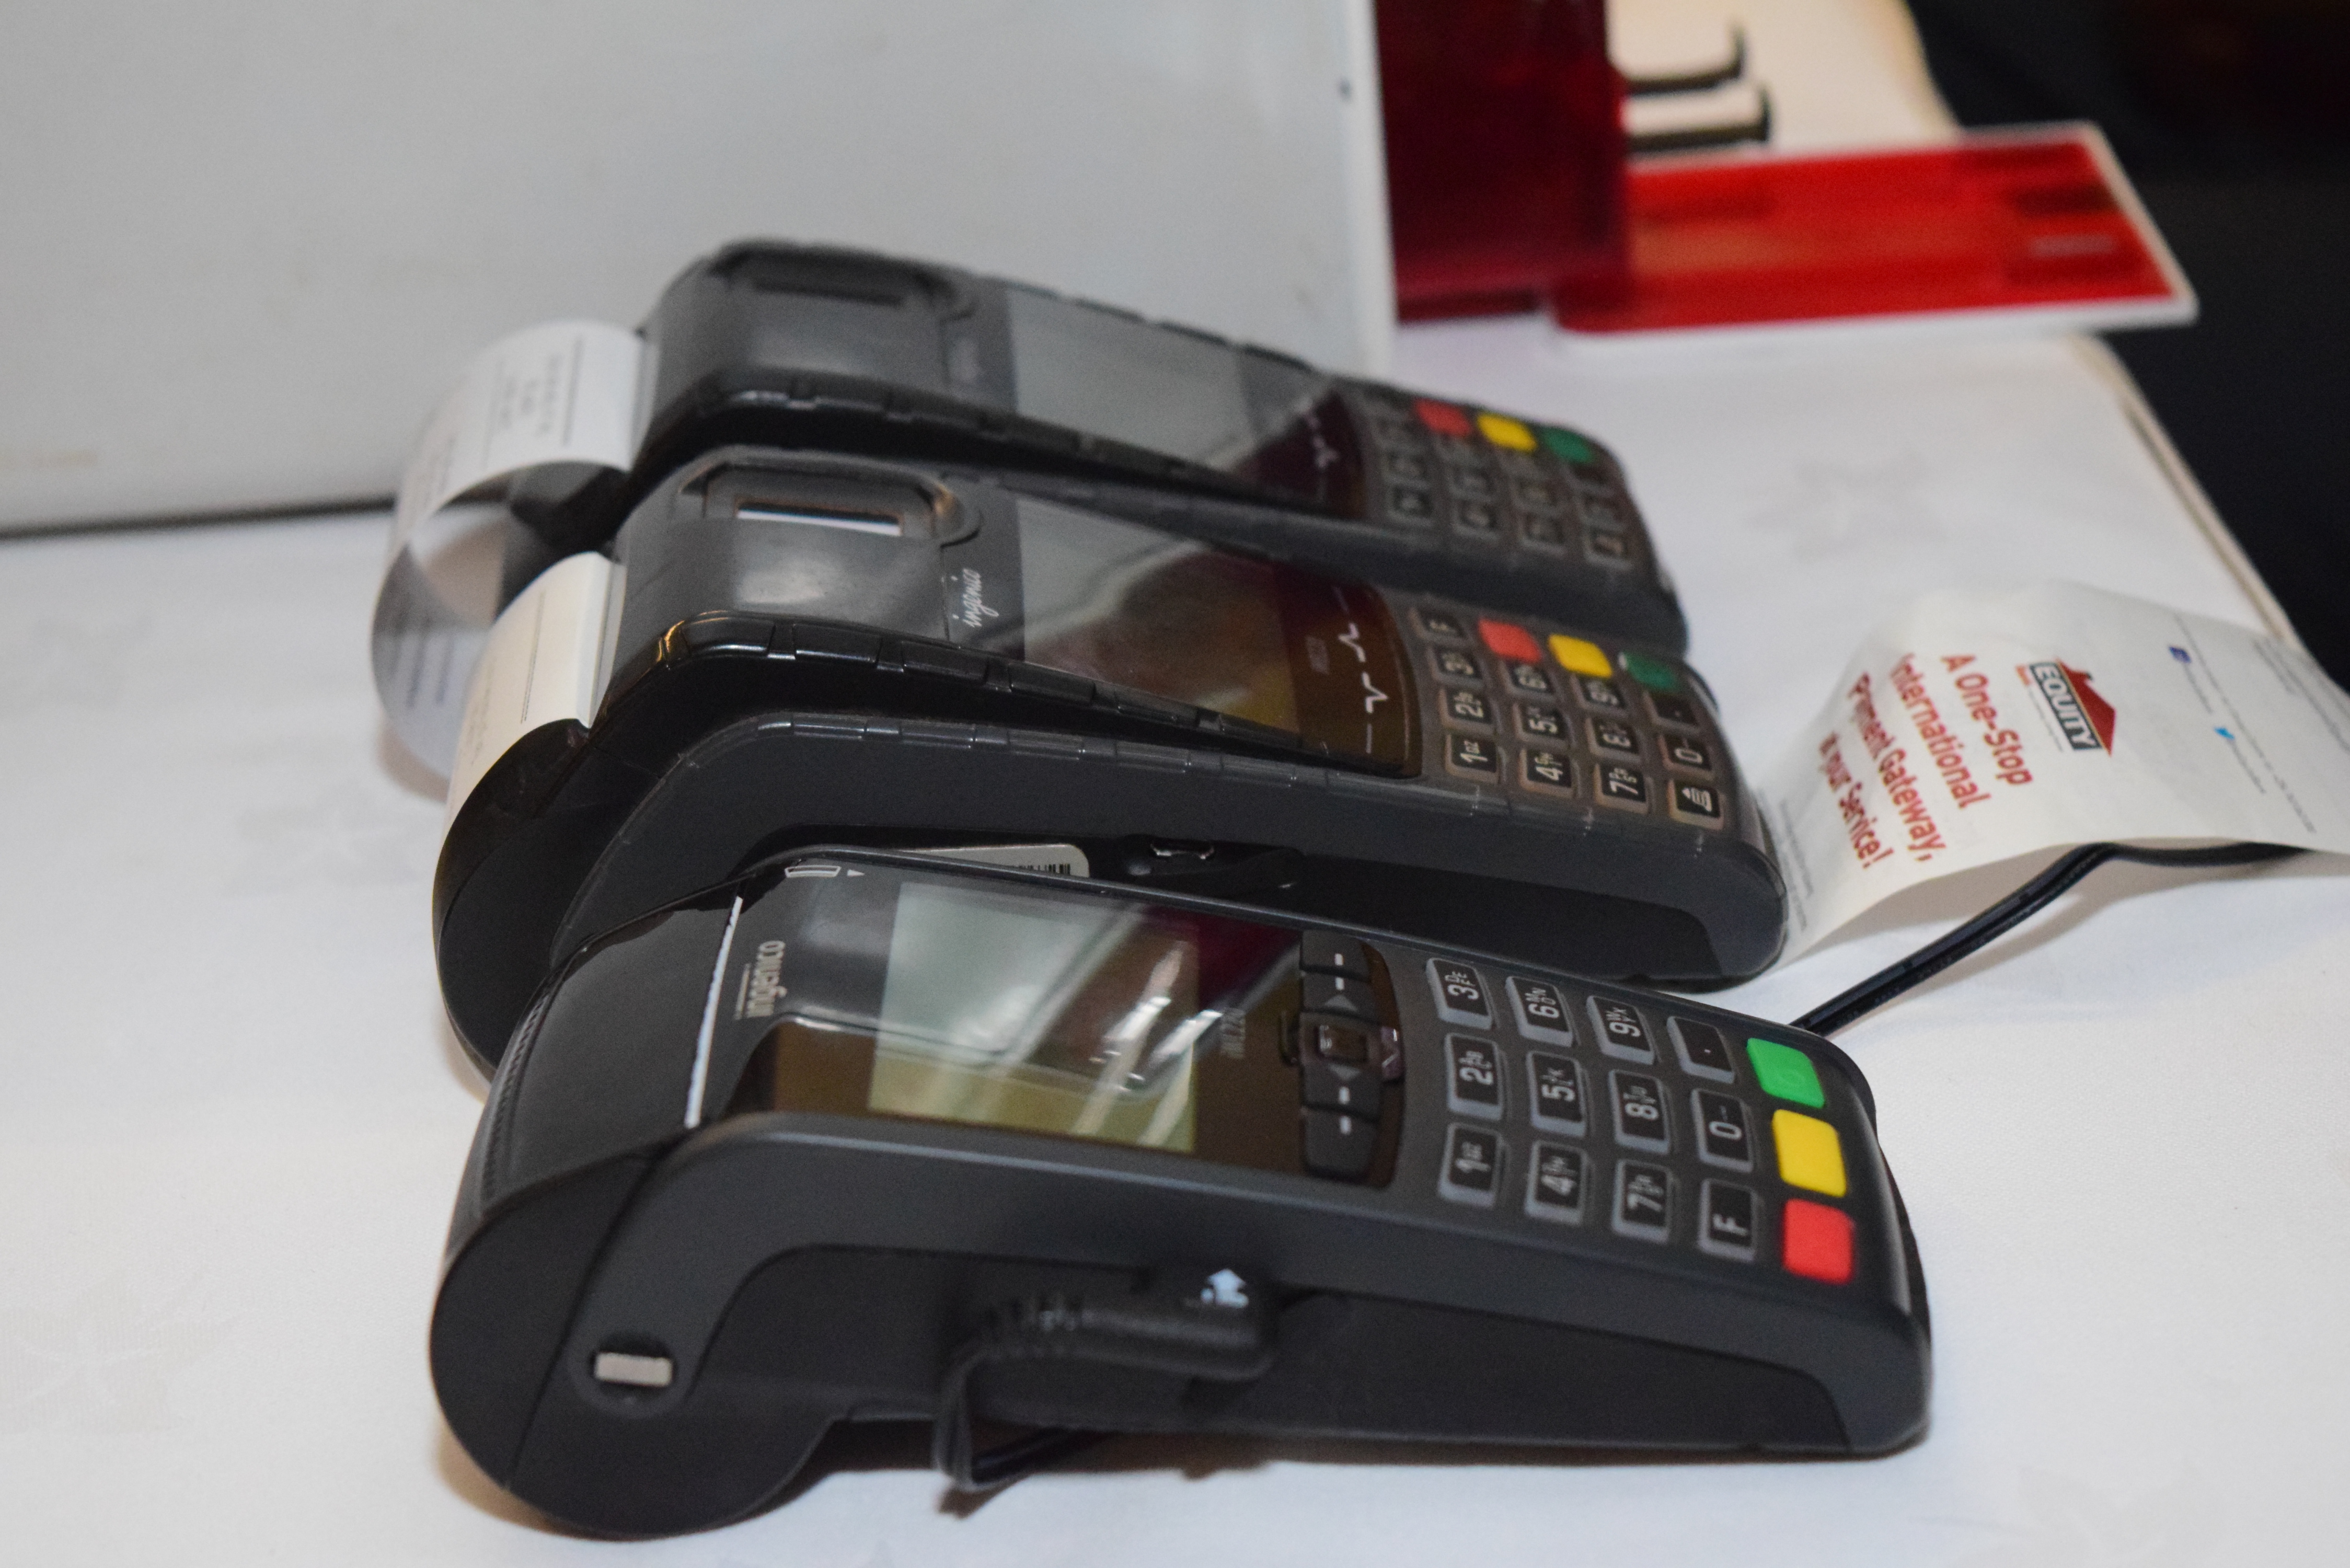 Equity Bank Showcases Biometric Card Solutions for Refugees